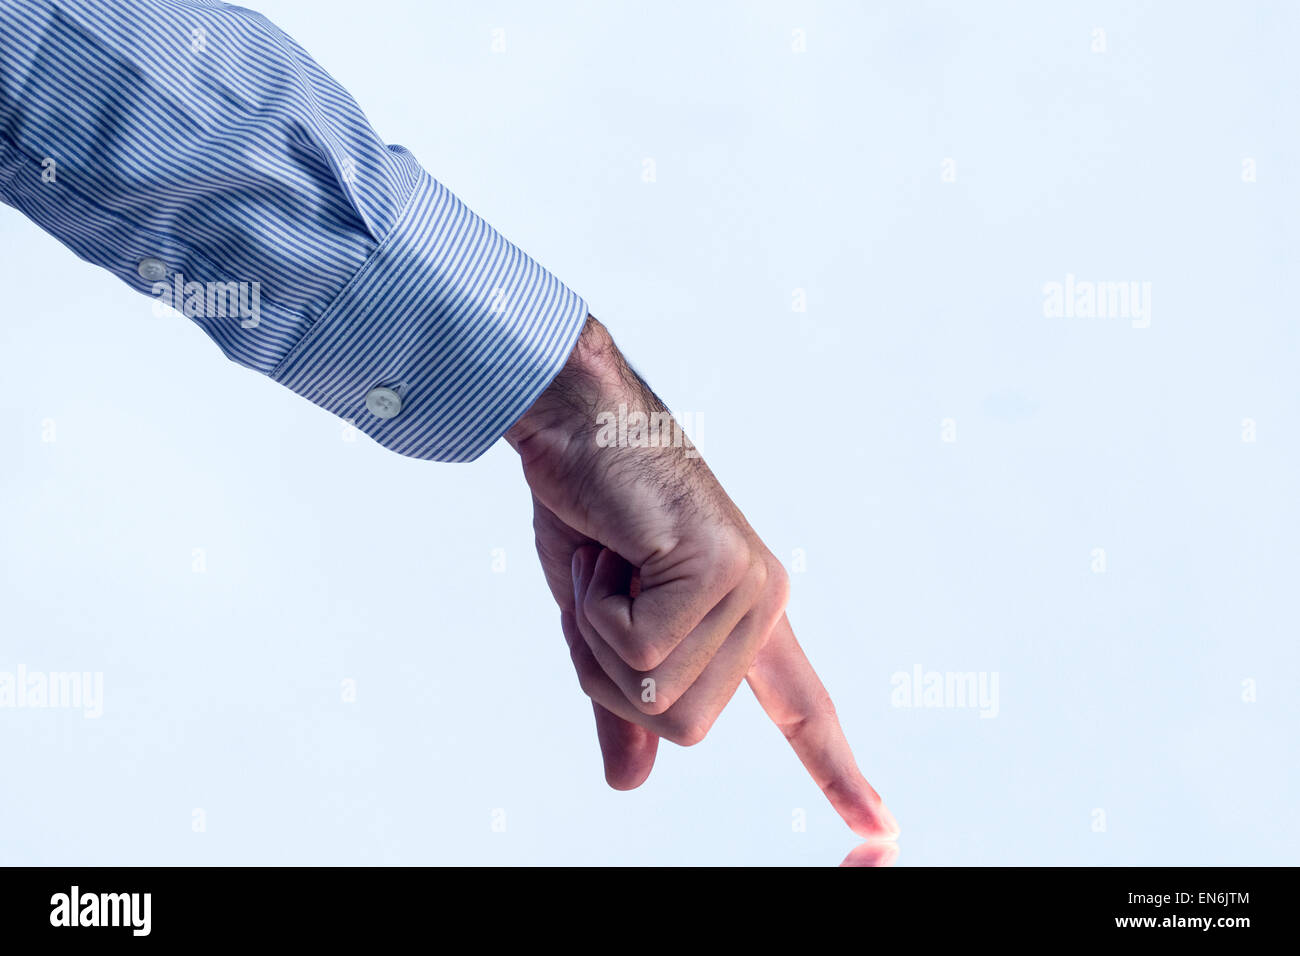 Man pointing on reflective surface Stock Photo